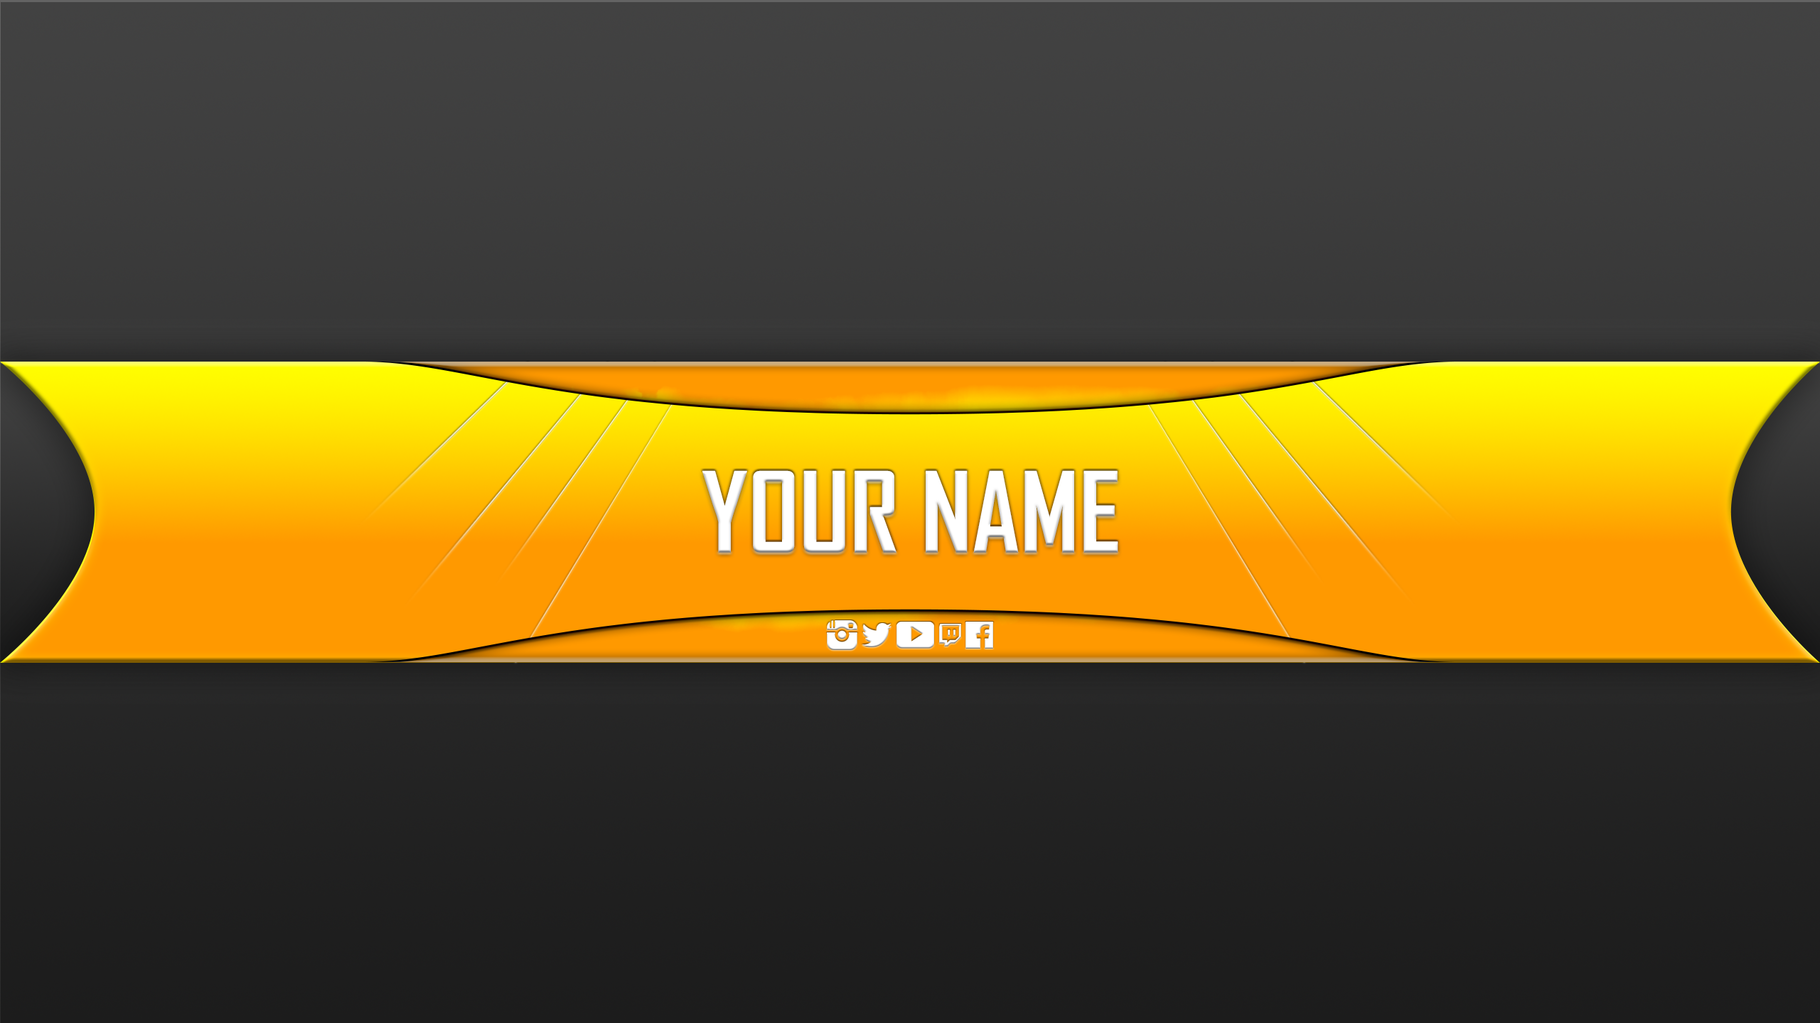 youtube-banner-free-download